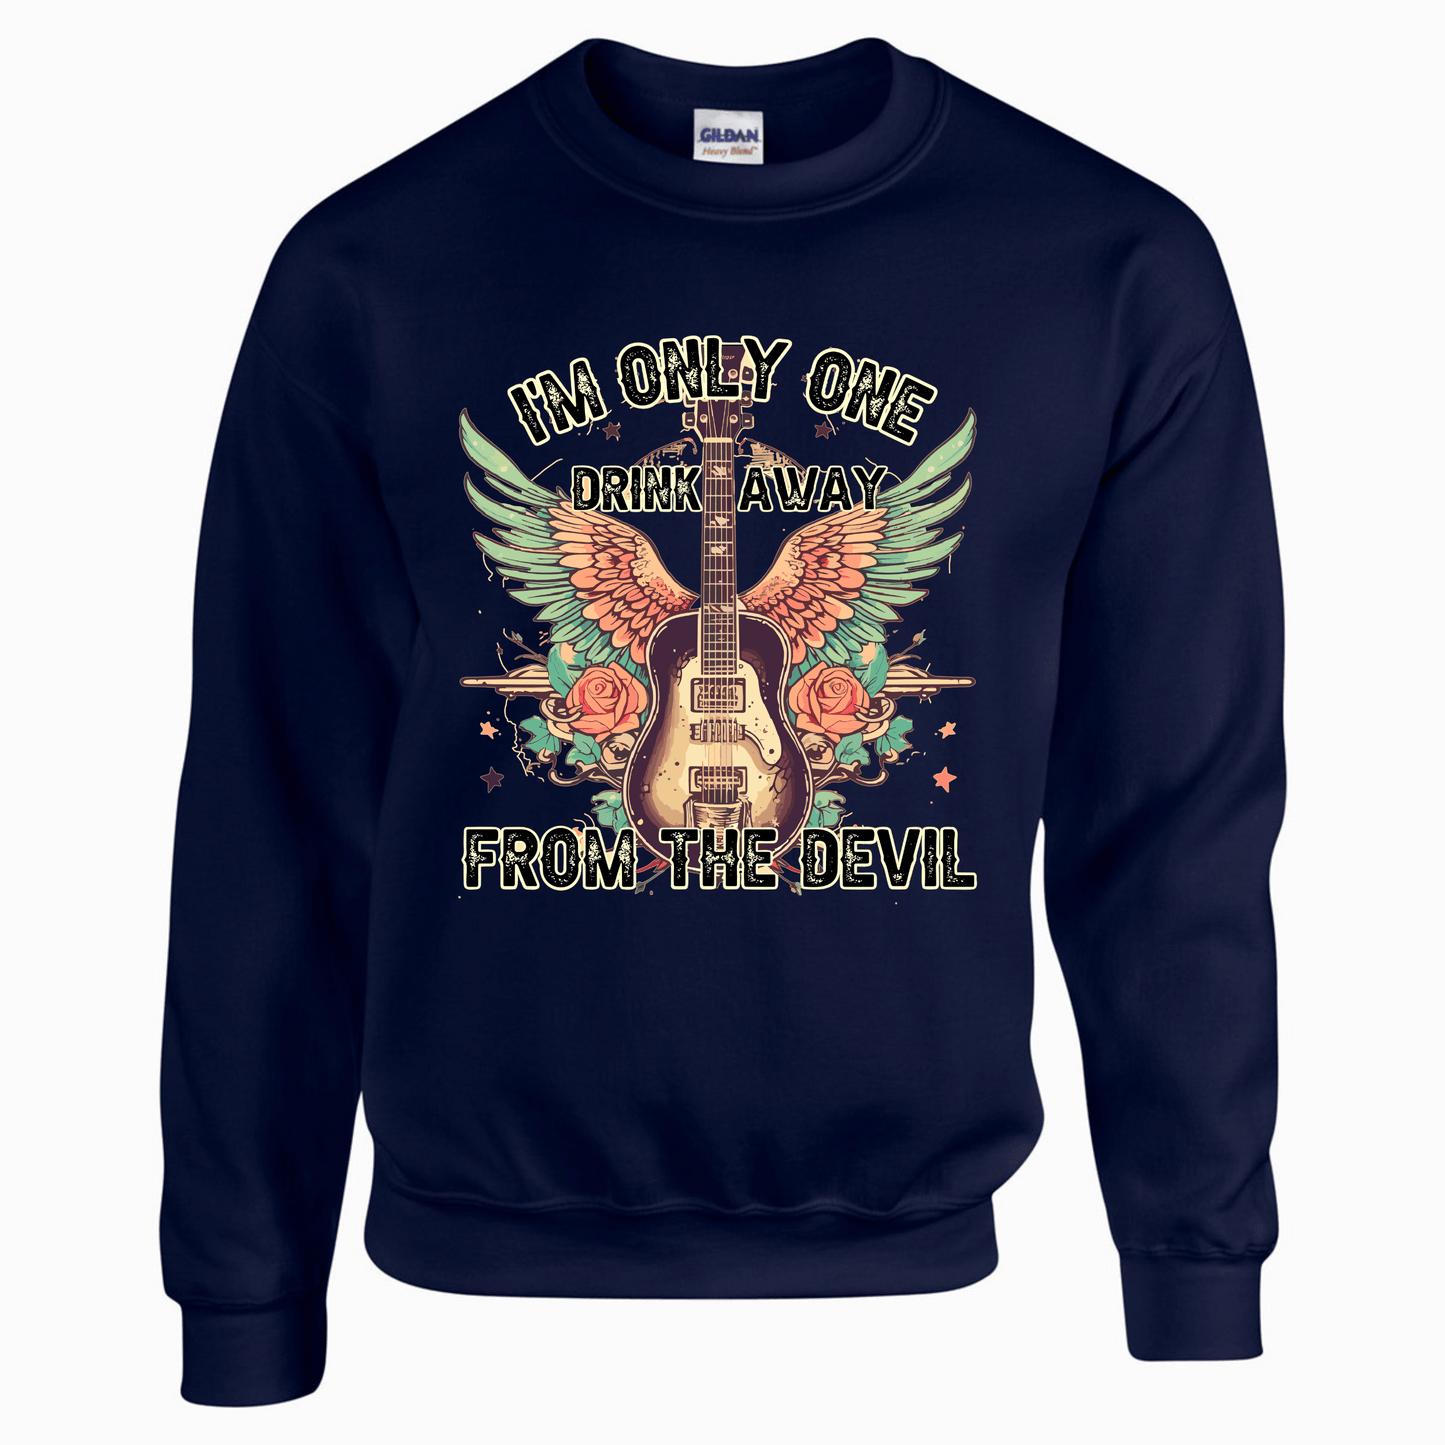 One Drink Away from the Devil Graphic Sweatshirt